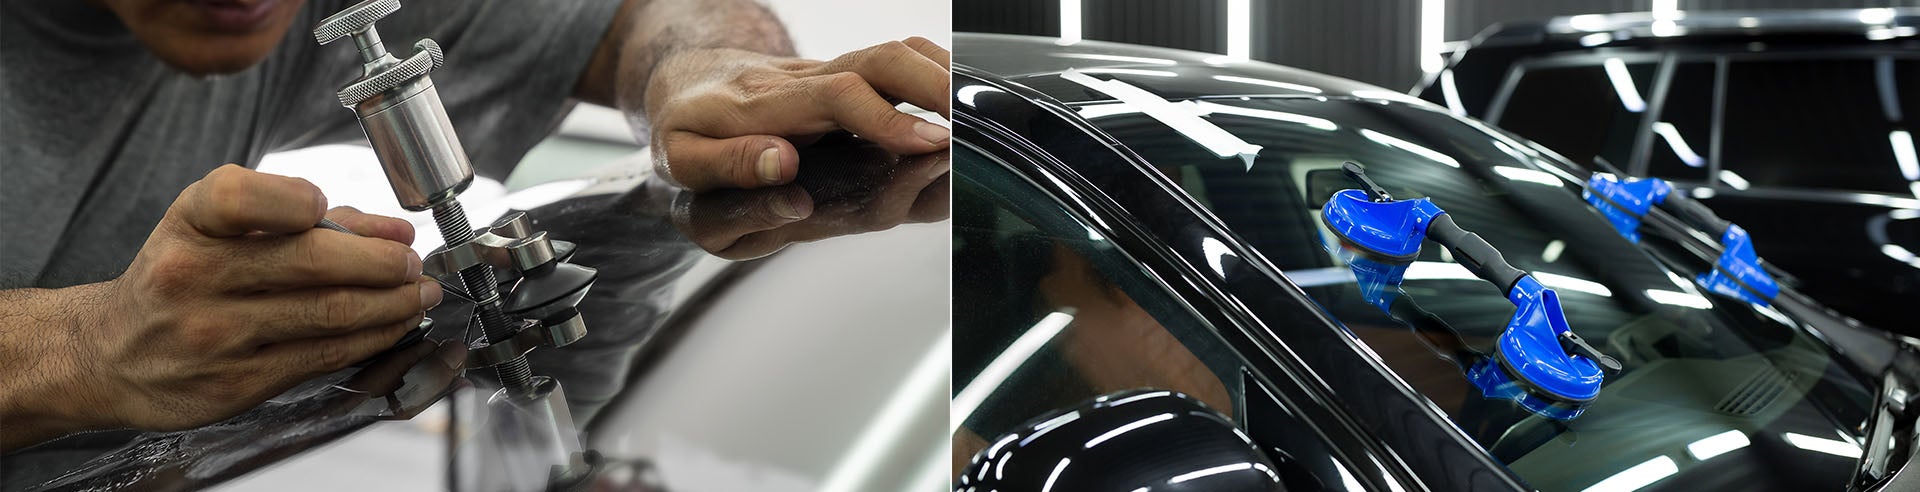 AUTO GLASS REPAIR AND REPLACEMENT